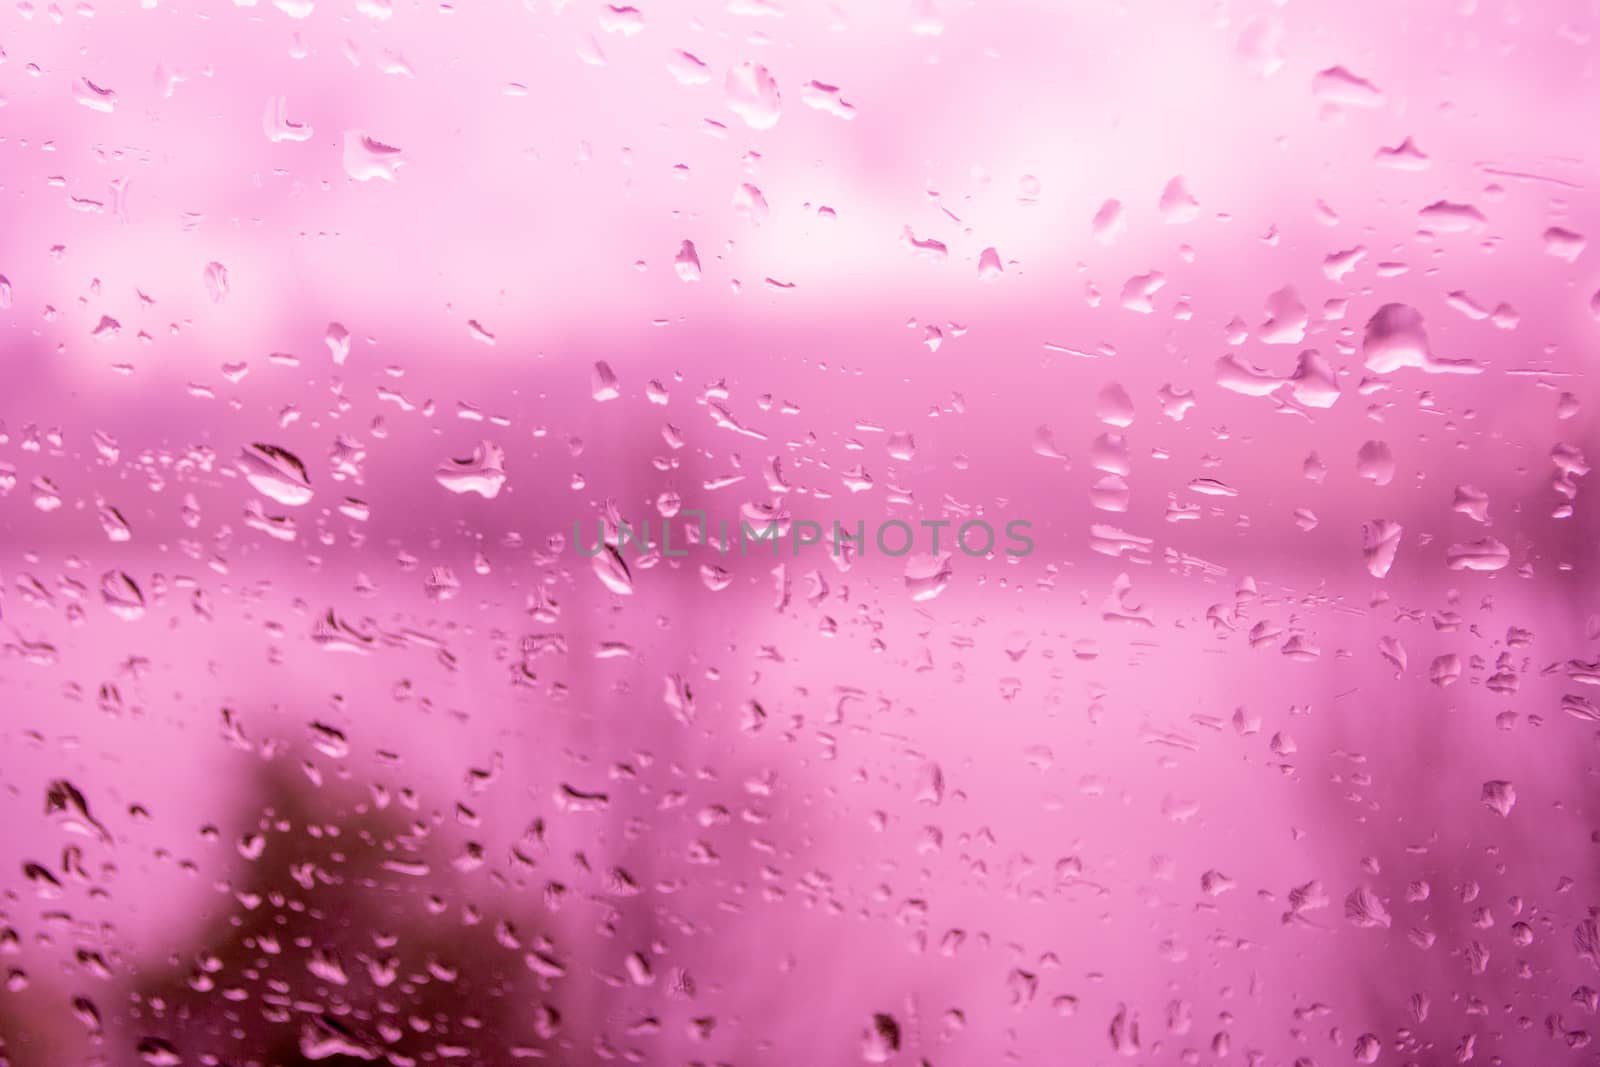 Raindrops on a window, illustrating gray and rainy weather during the day. Magenta background. by kb79